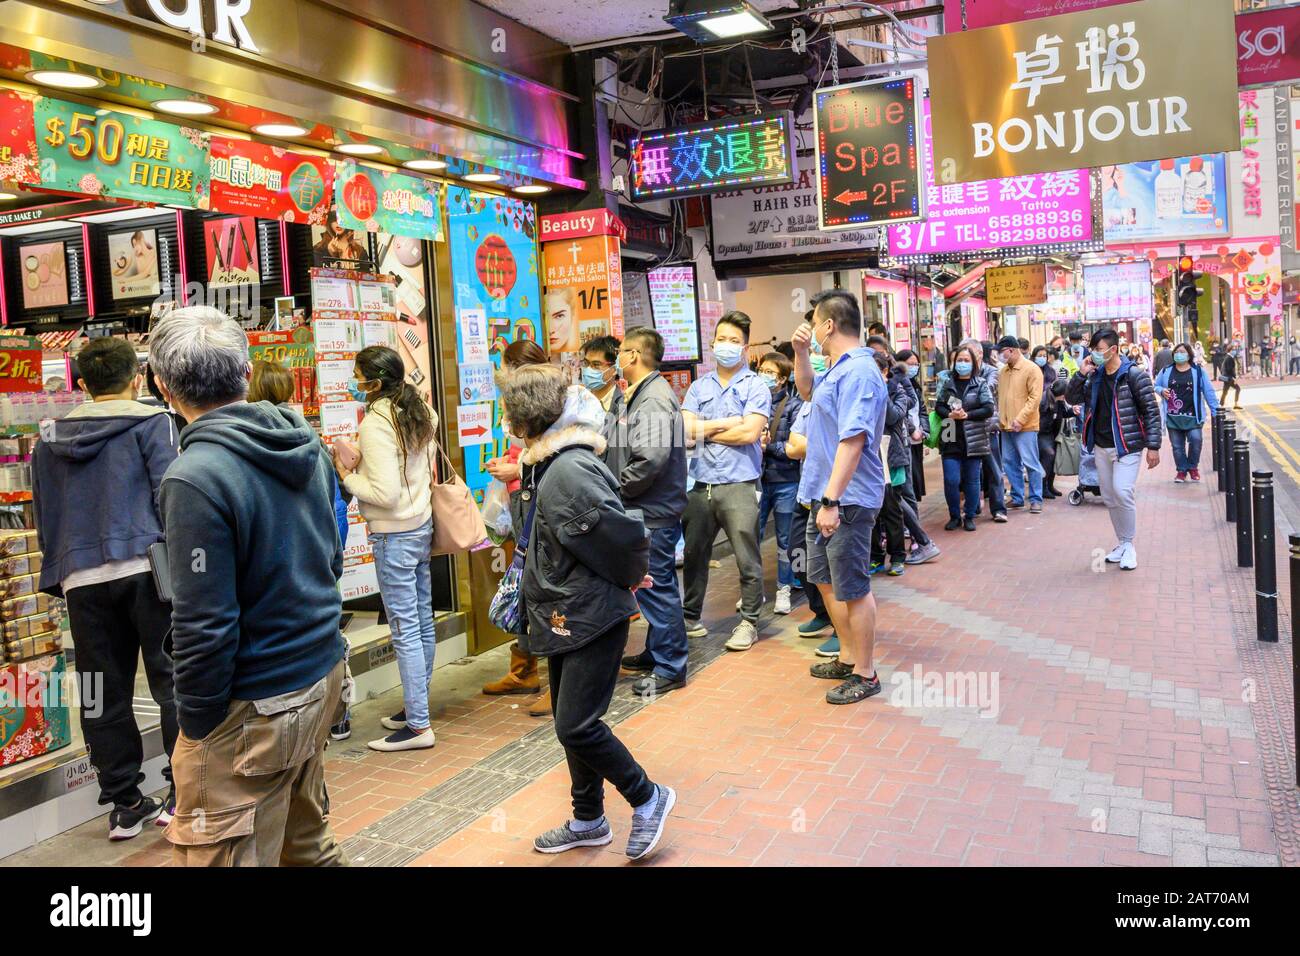 Causeway Bay Hong Kong. 31st Jan, 2020. Hundreds of people queue to buy surgical masks at a Bonjour Cosmetics stores in Causeway Bay.  There is a shortage of face masks in the city and people often line up for hours in hopes of purchasing some at inflated prices. Stock Photo